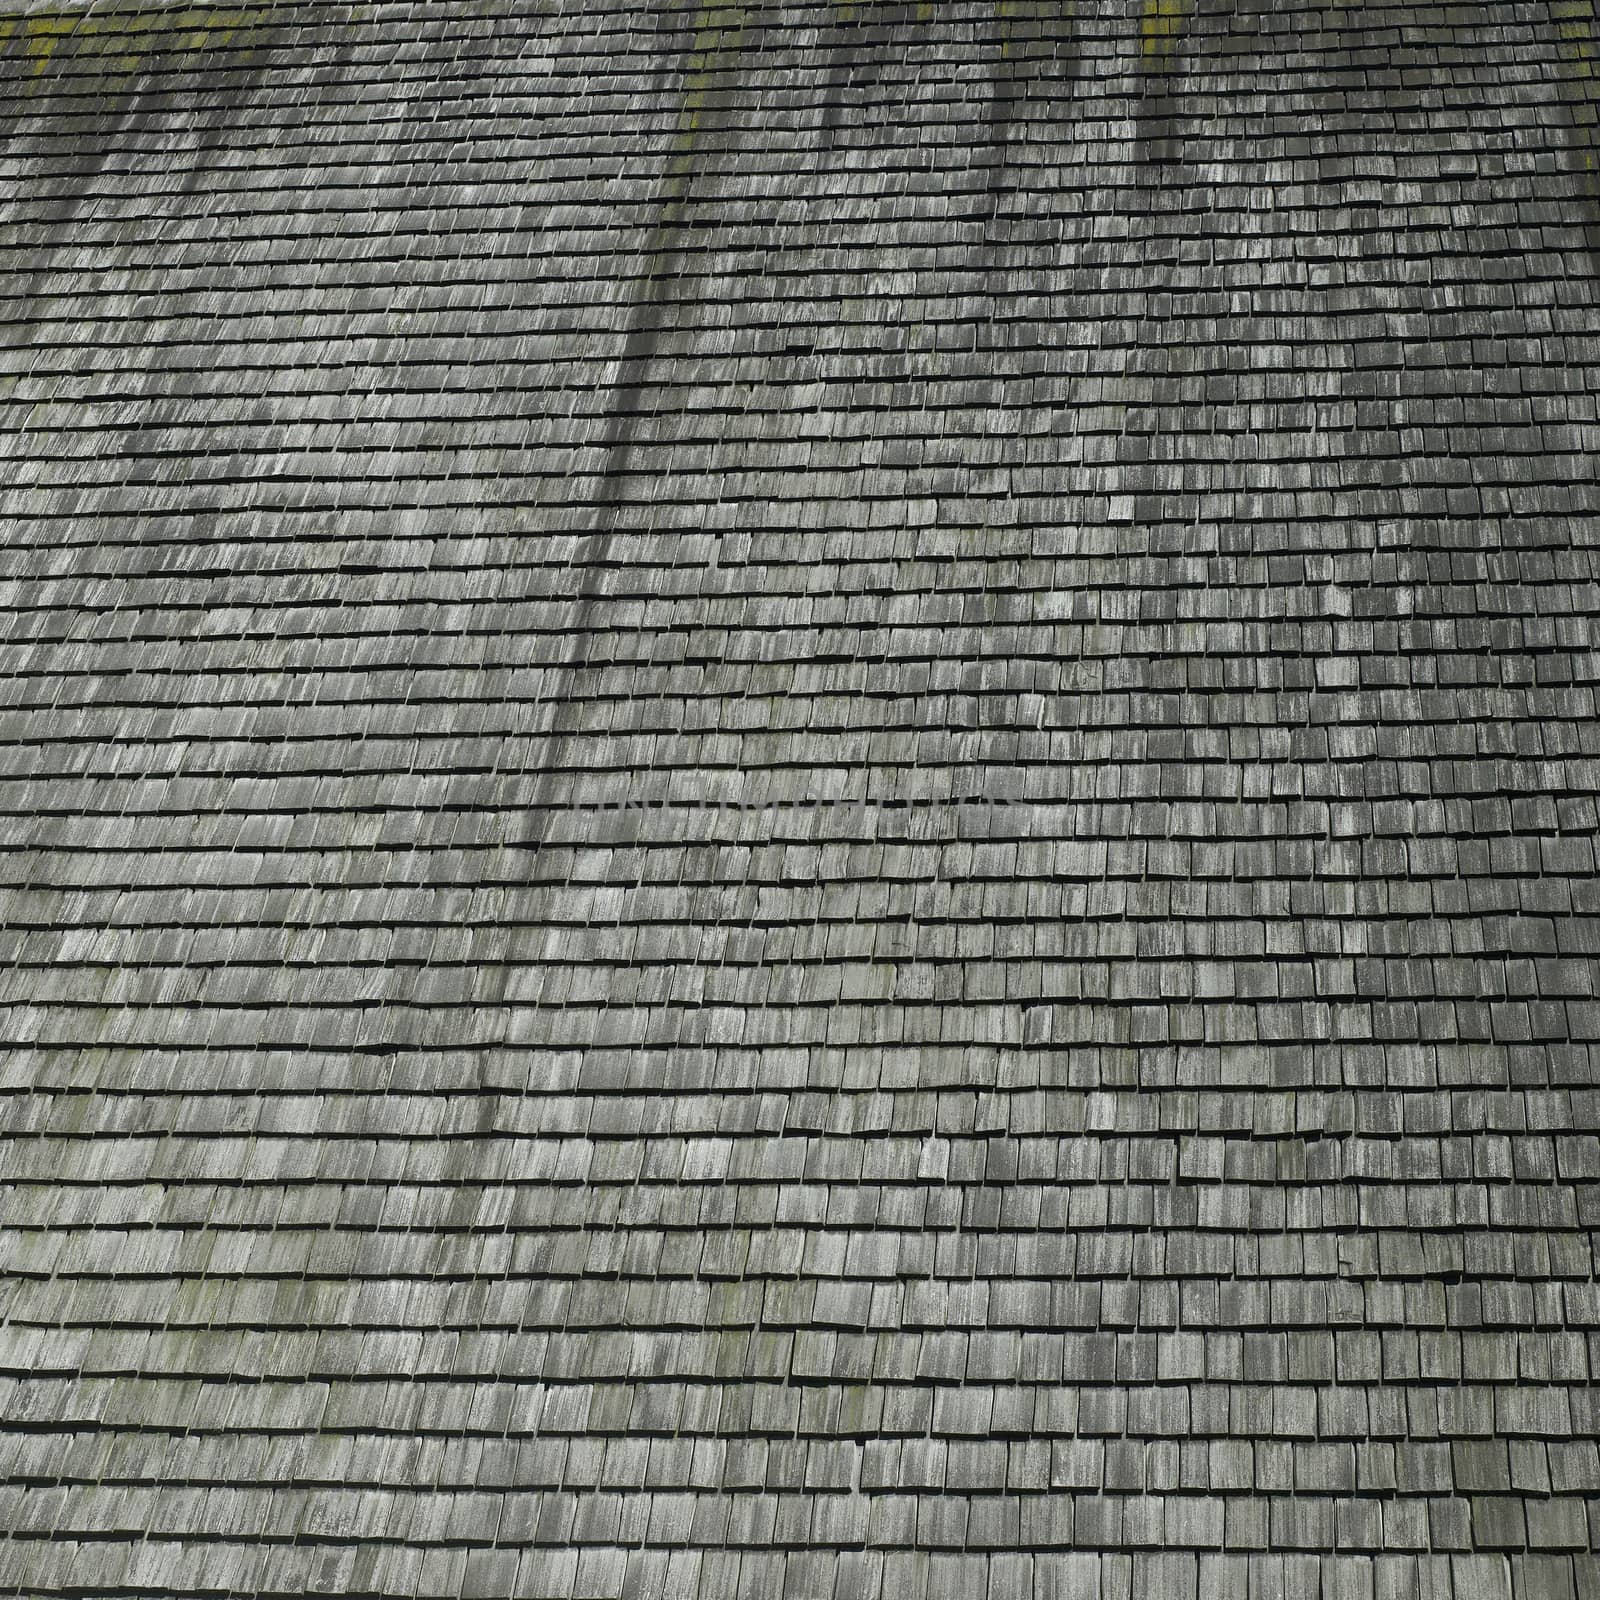 Moss growing on a wooden shingled rooftop